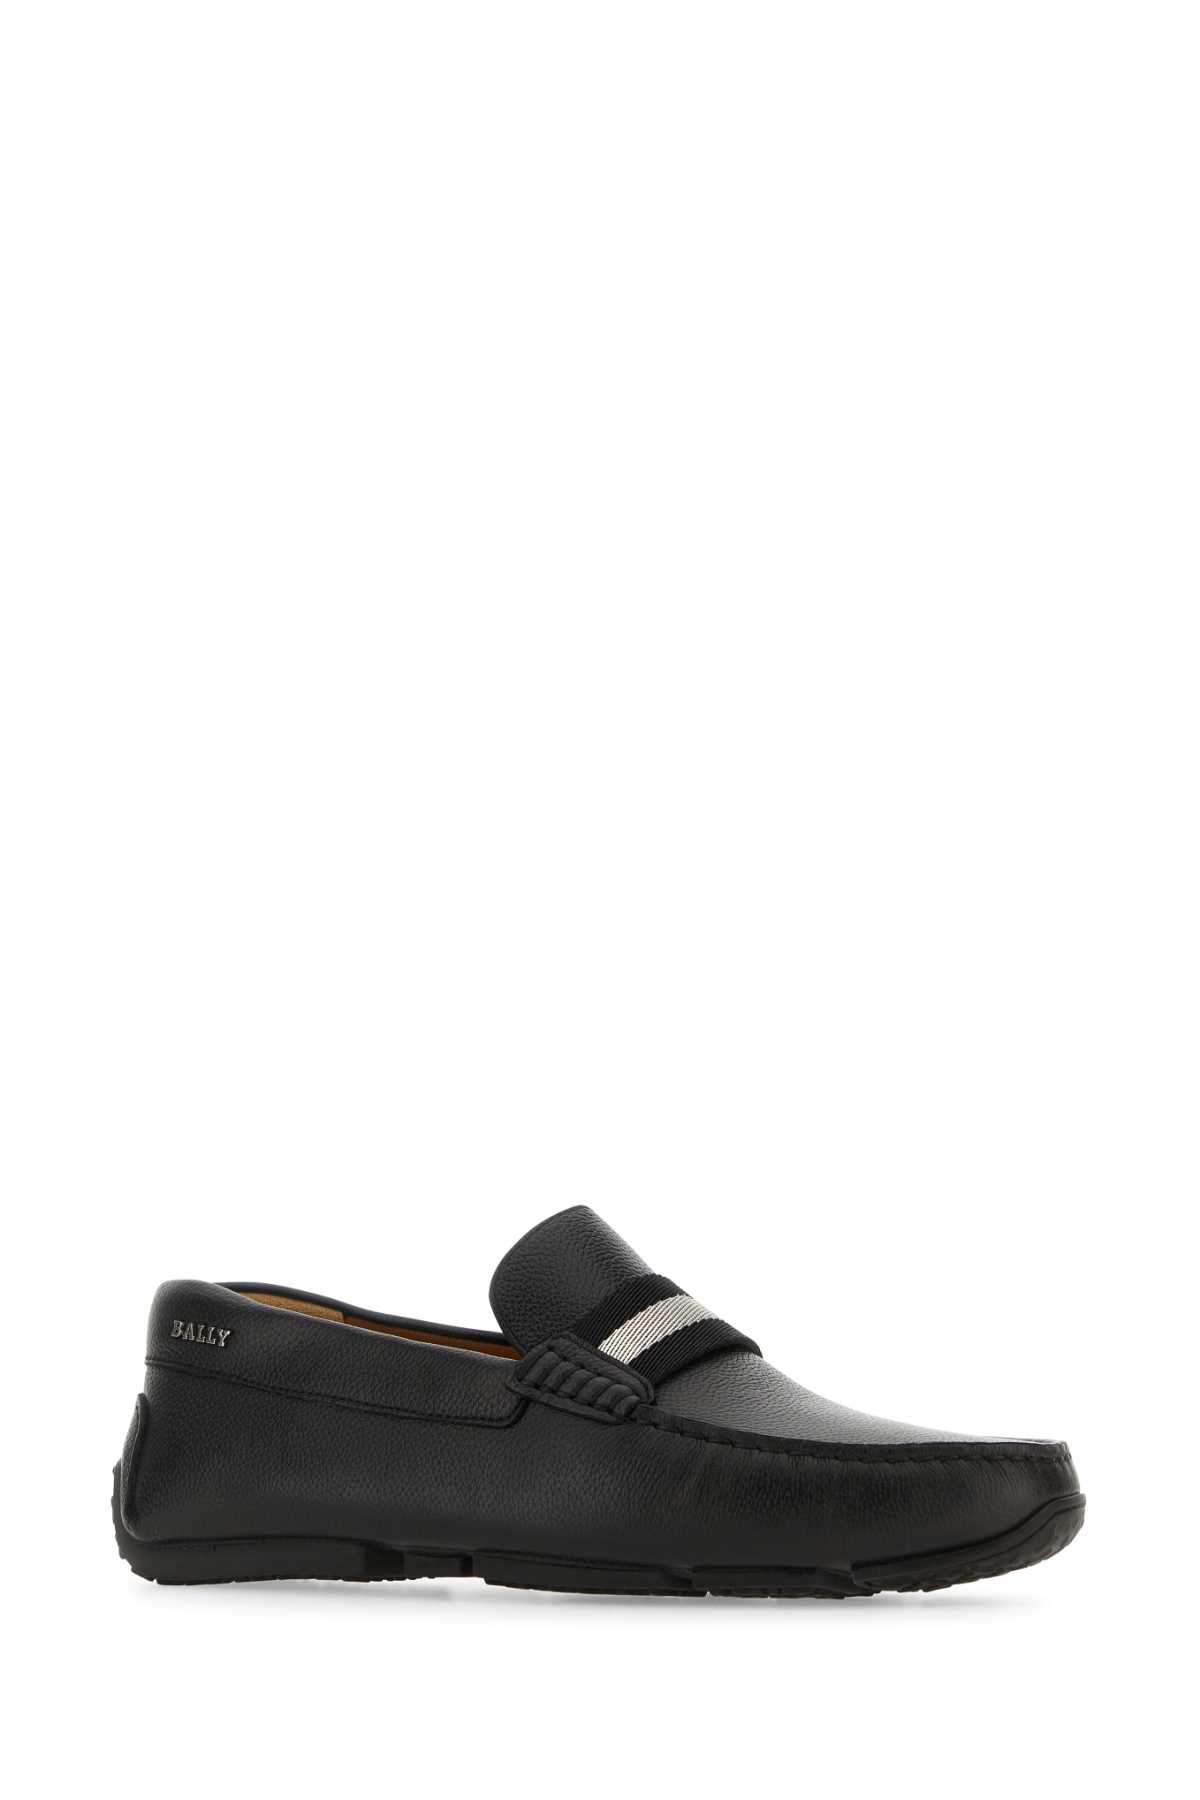 Shop Bally Black Leather Pearce Loafers